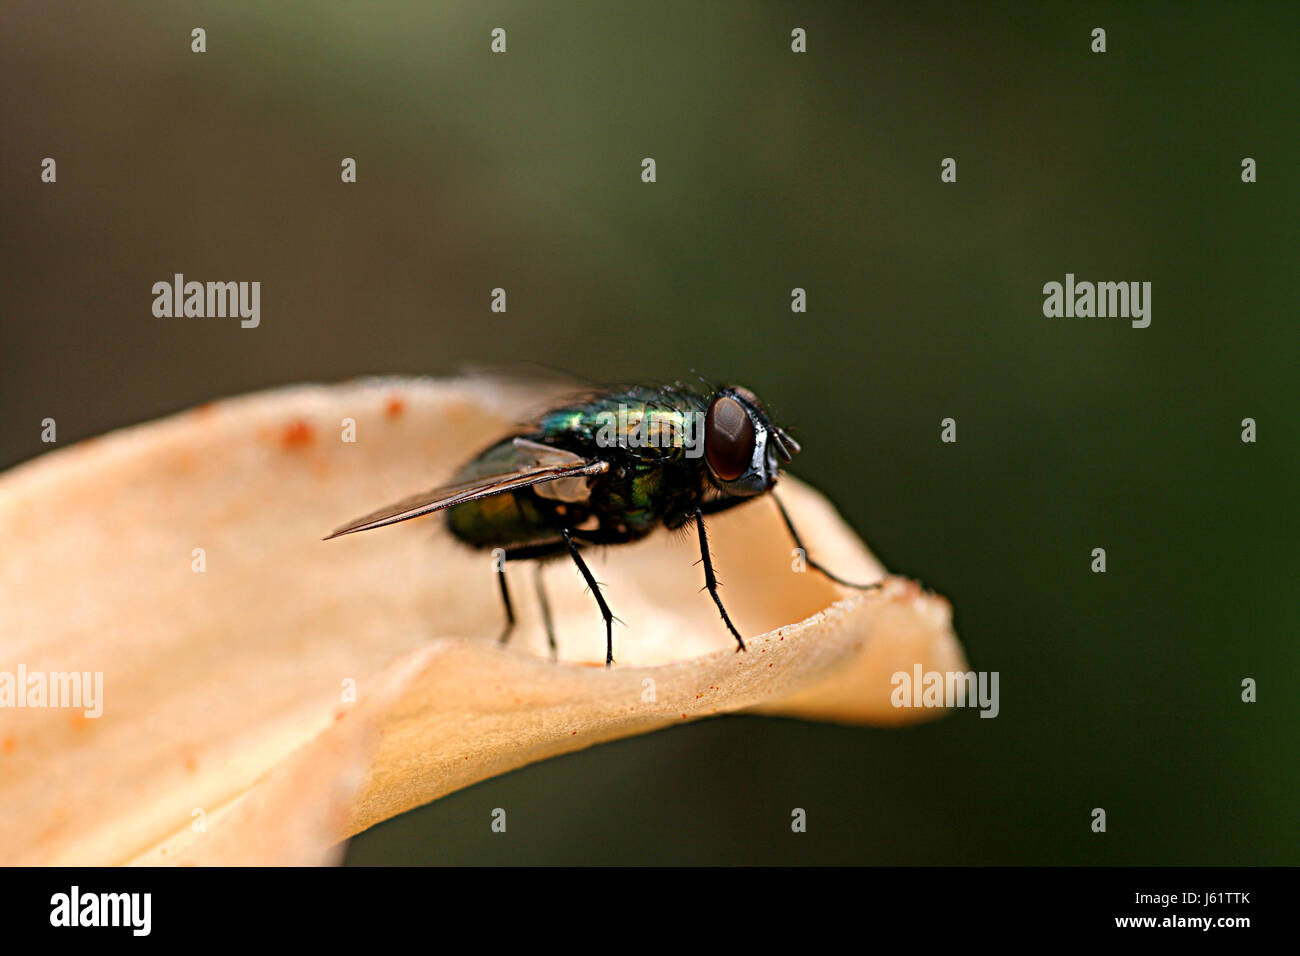 insect lily fly iridescence put sitting sit flies flys flying macro close-up Stock Photo